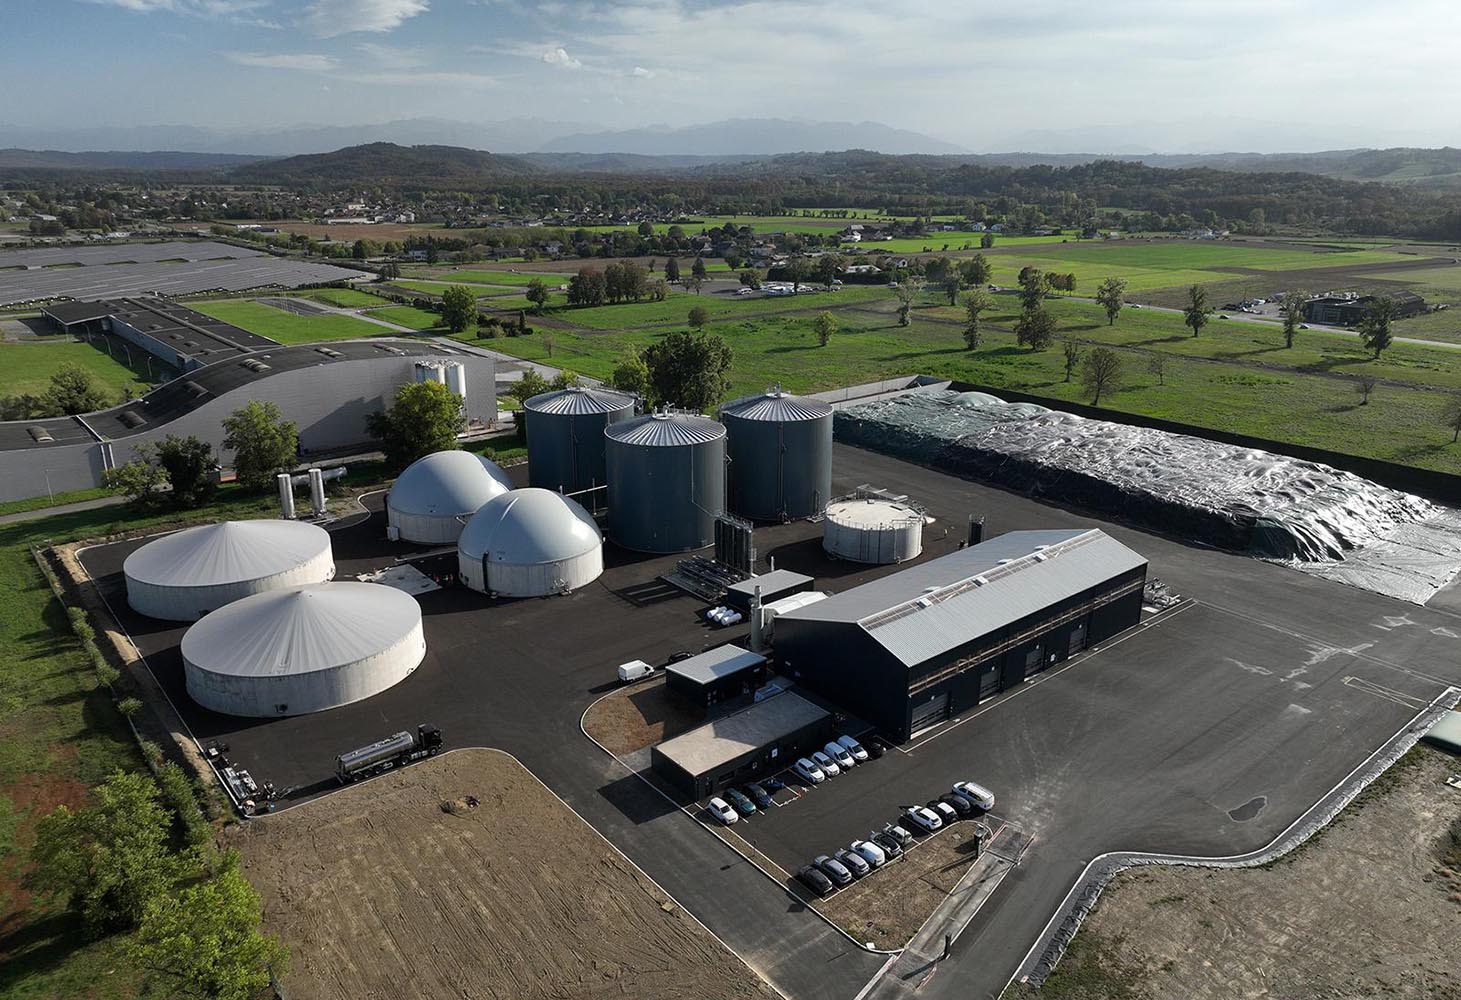 To develop biogas value chain, TotalEnergies buys stake in Ductor